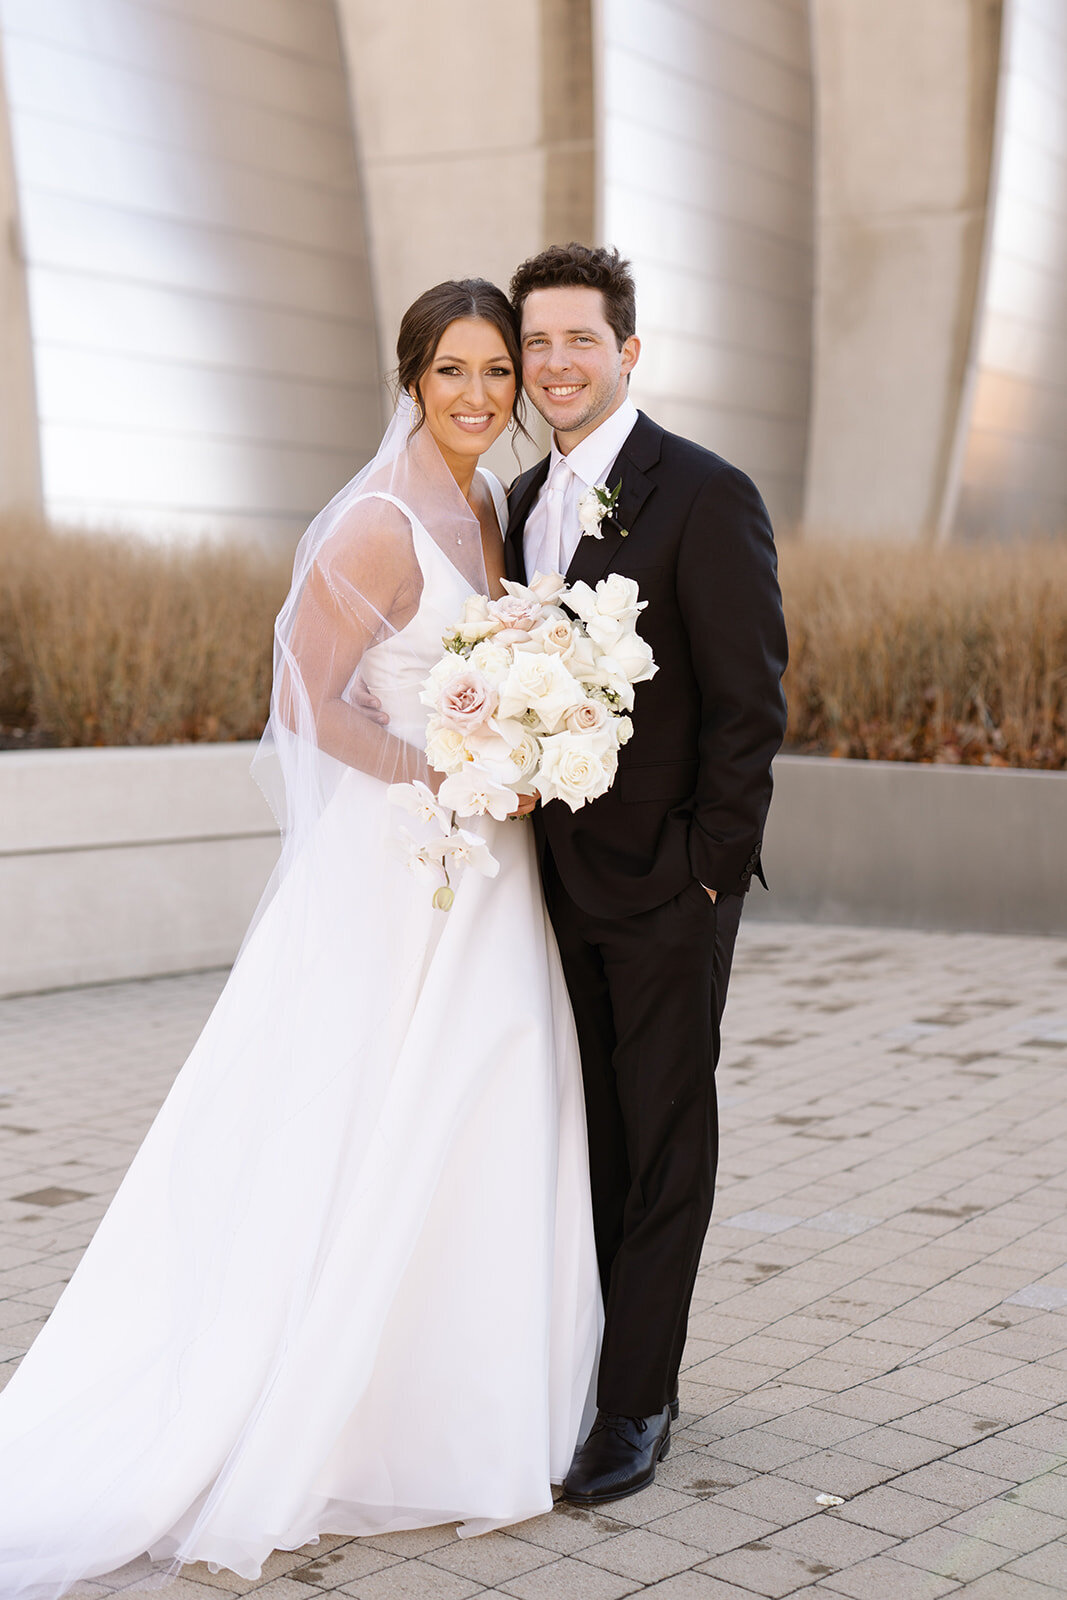 Kylie and Jack at The Grand Hall - Kansas City Wedding Photograpy - Nick and Lexie Photo Film-338